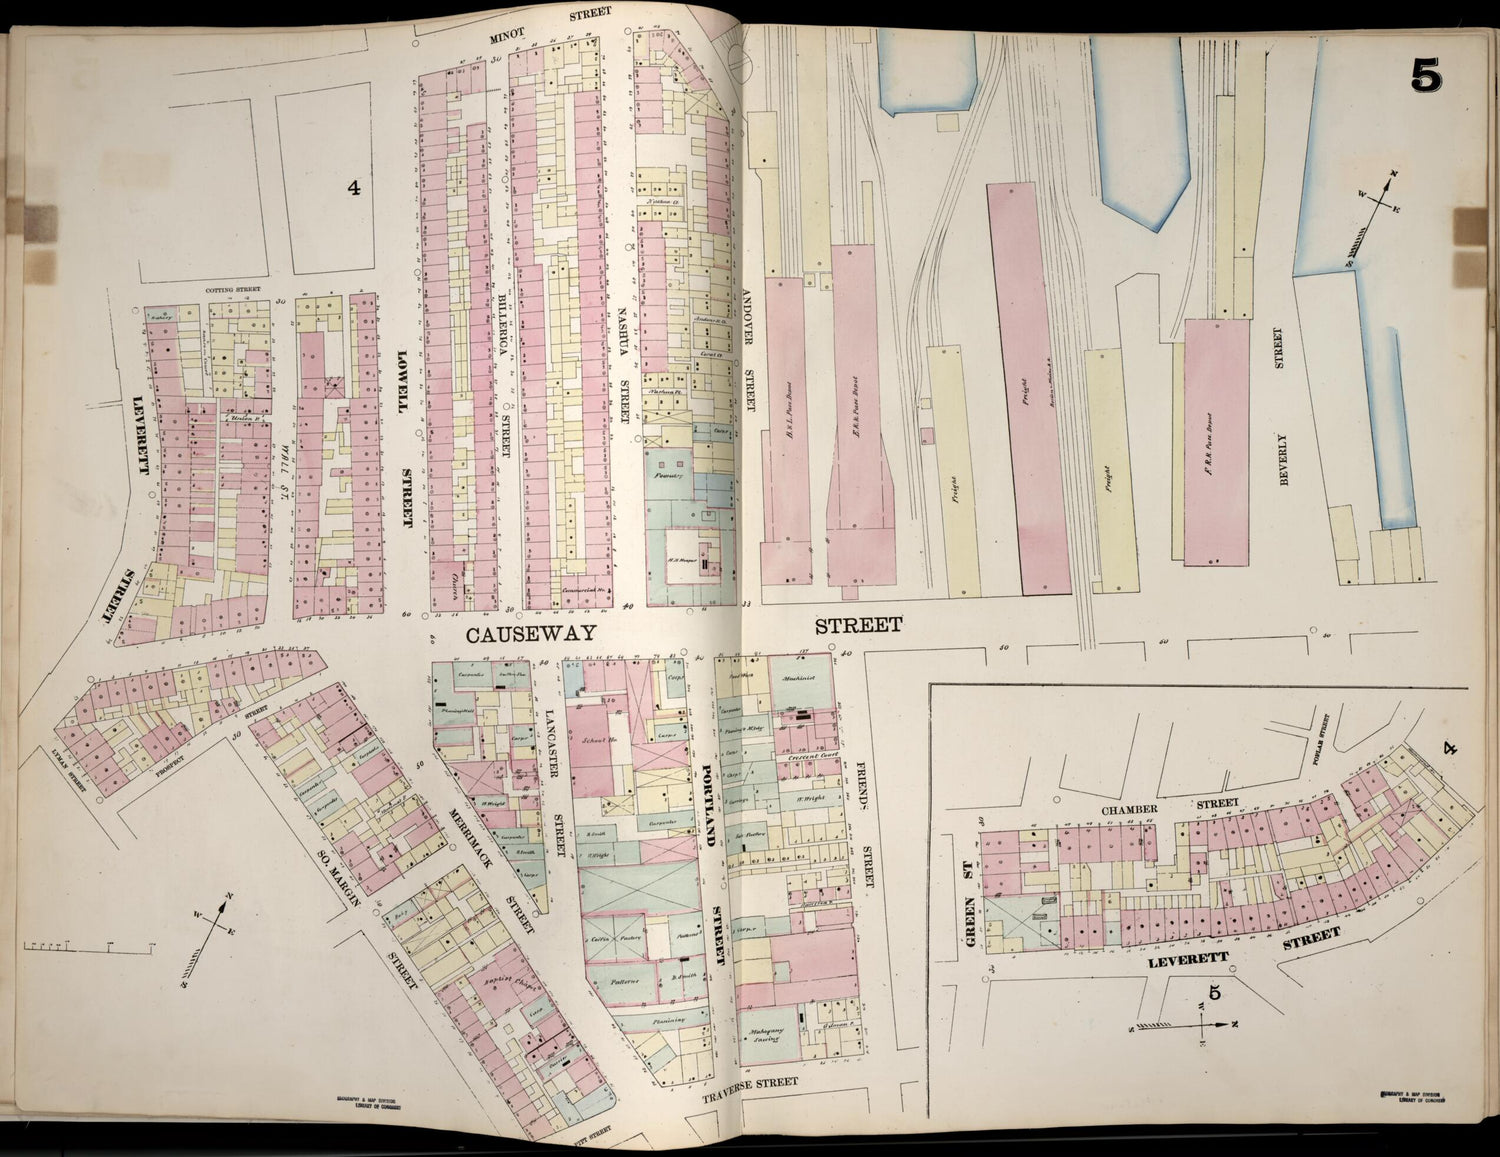 This old map of Image 6 of Boston from Insurance Map of Boston. Volume 1 from 1867 was created by D. A. (Daniel Alfred) Sanborn in 1867